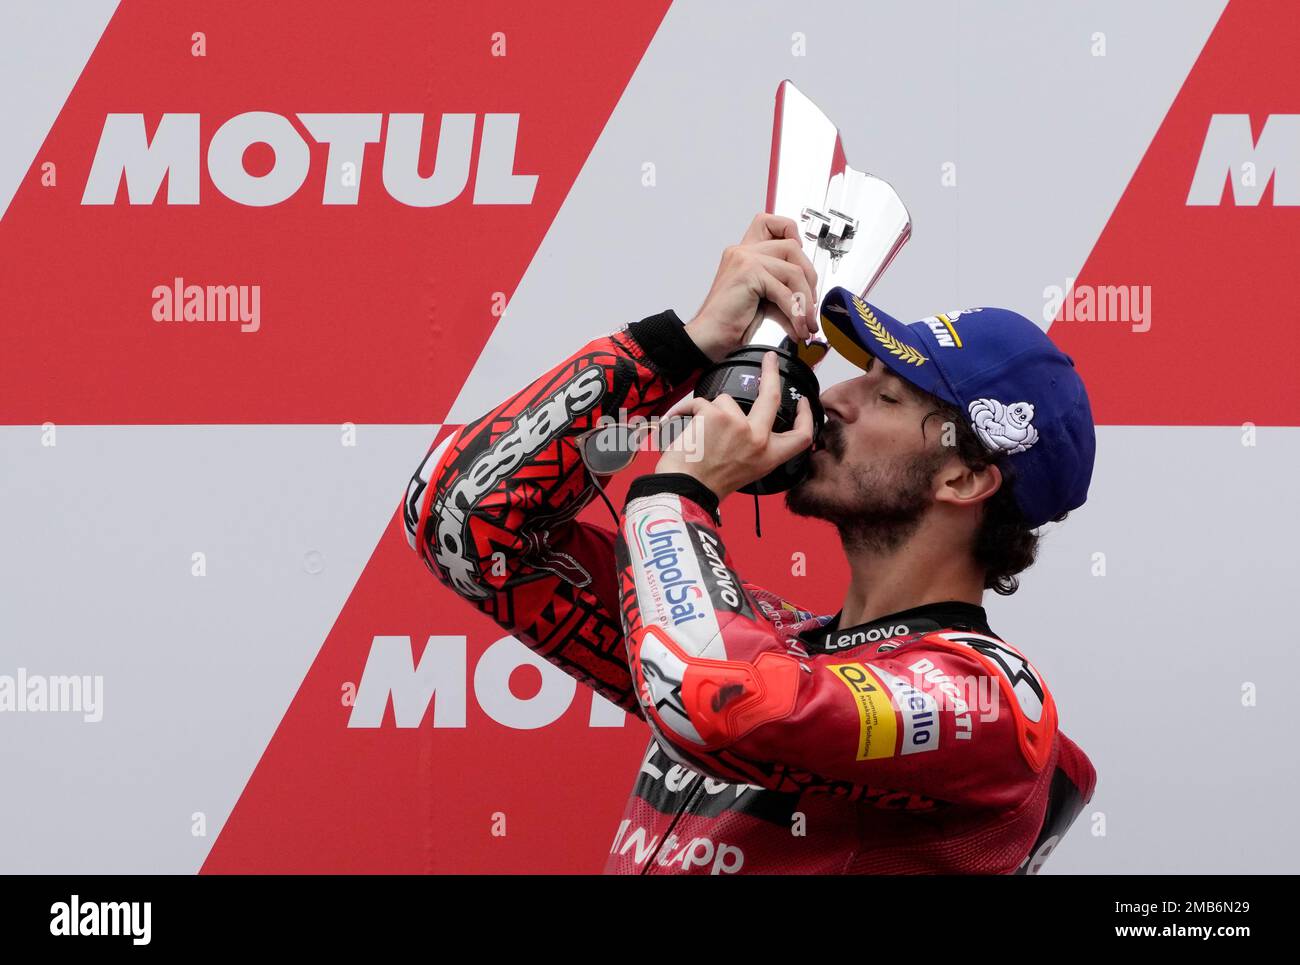 Italian rider Francesco Bagnaia of the Ducati Lenovo Team celebrates with trophy on the podium after winning the MotoGP race at the Dutch Grand Prix in Assen, northern Netherlands, Sunday, June 26,